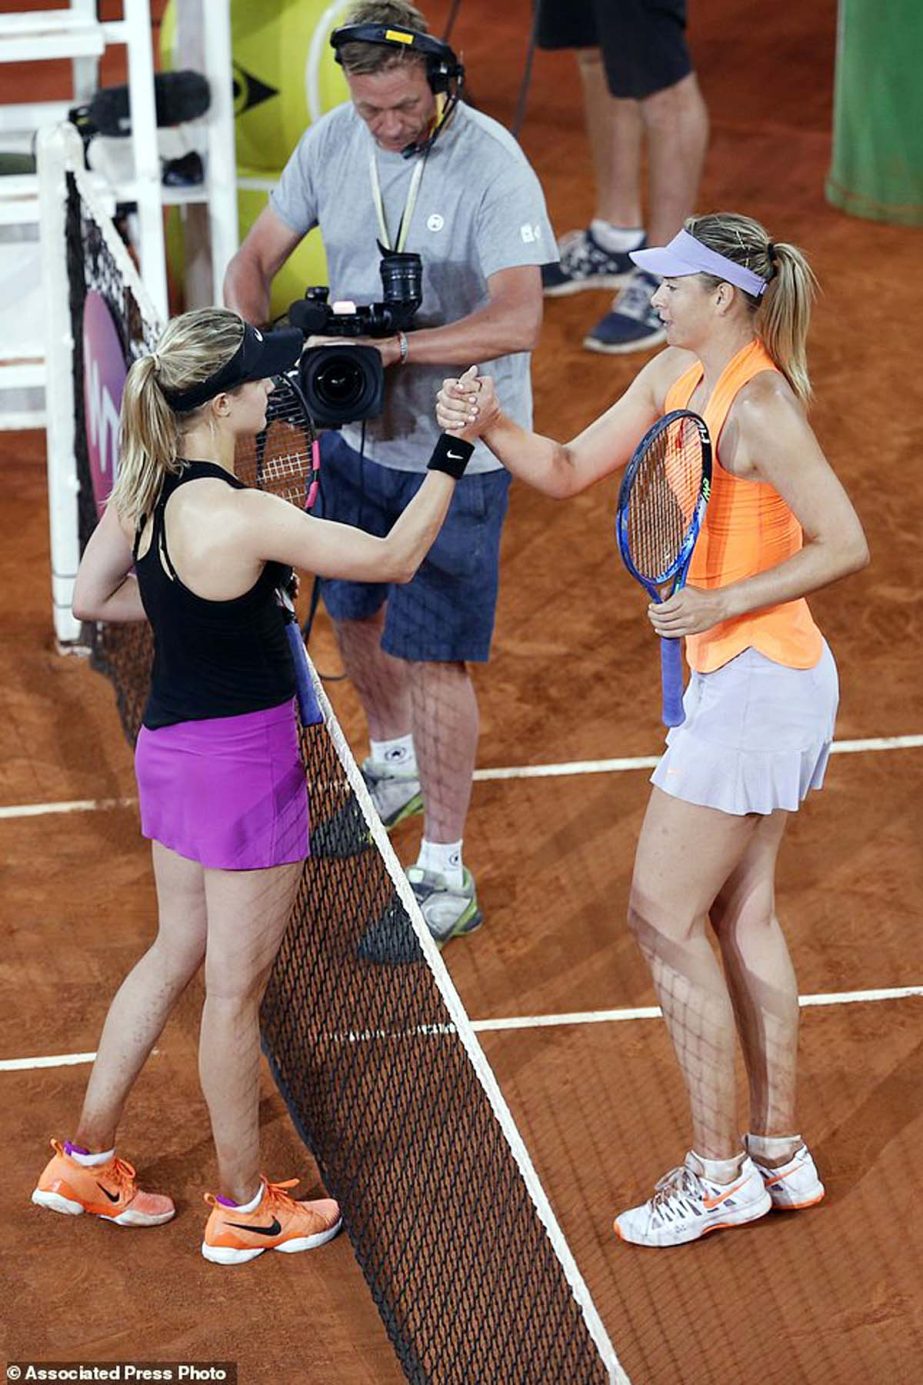 Eugenie Bouchard from Canada (left) shakes hands with Maria Sharapova from Russia at the end of their Madrid Open tennis tournament match in Madrid, Spain on Monday. Bouchard won 7-5, 2-6 and 6-4.